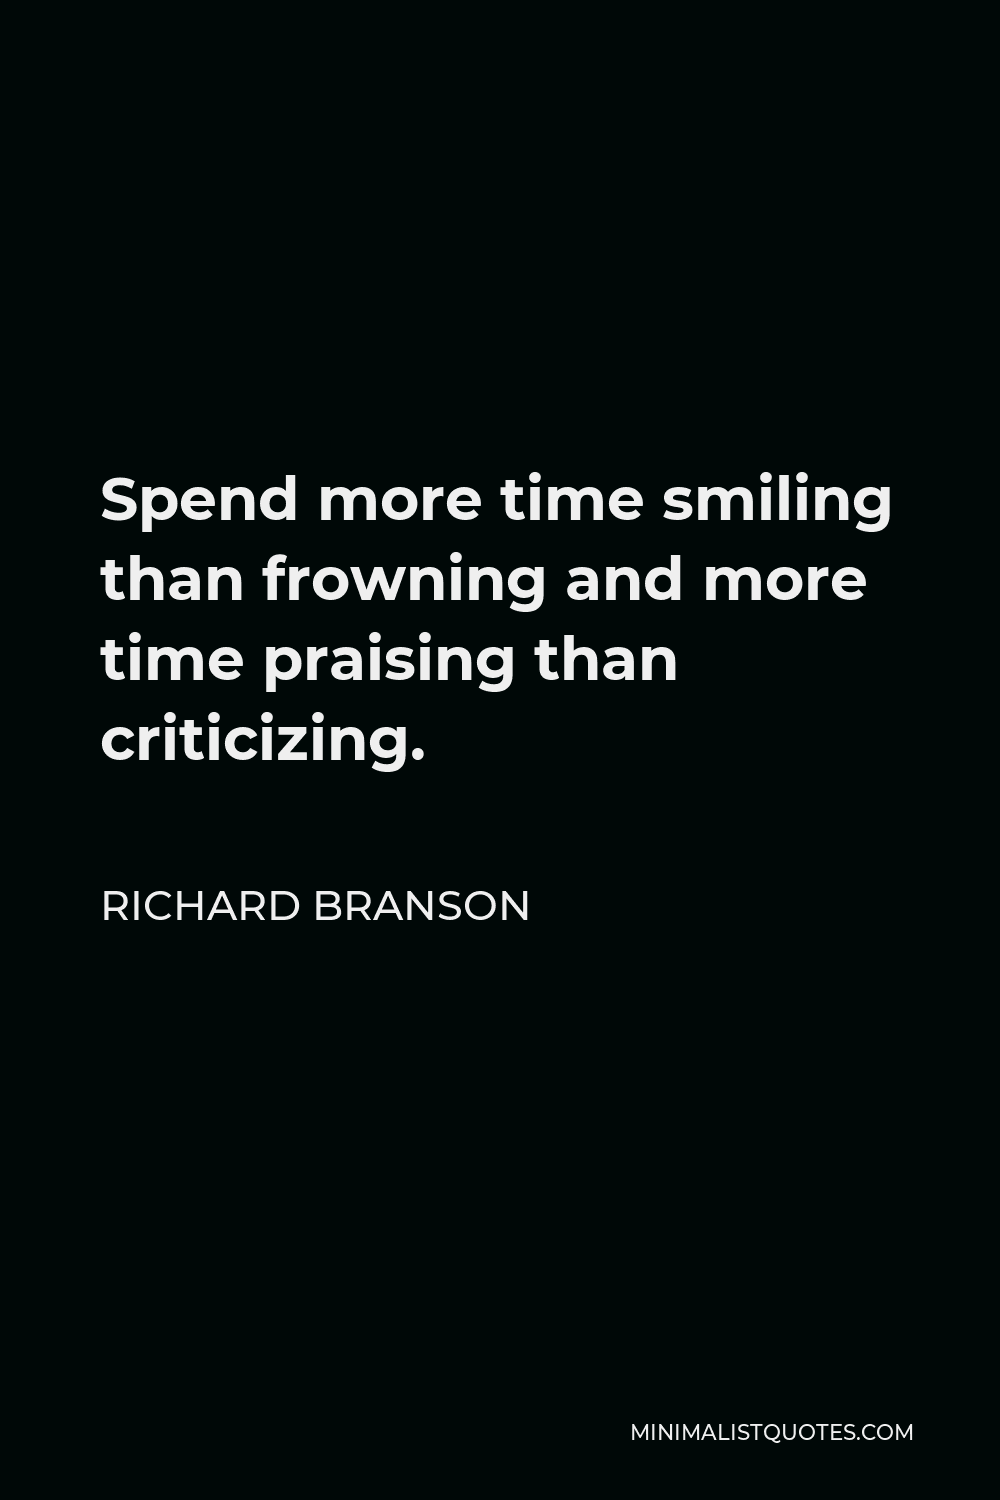 Richard Branson Quote - Spend more time smiling than frowning and more time praising than criticizing.